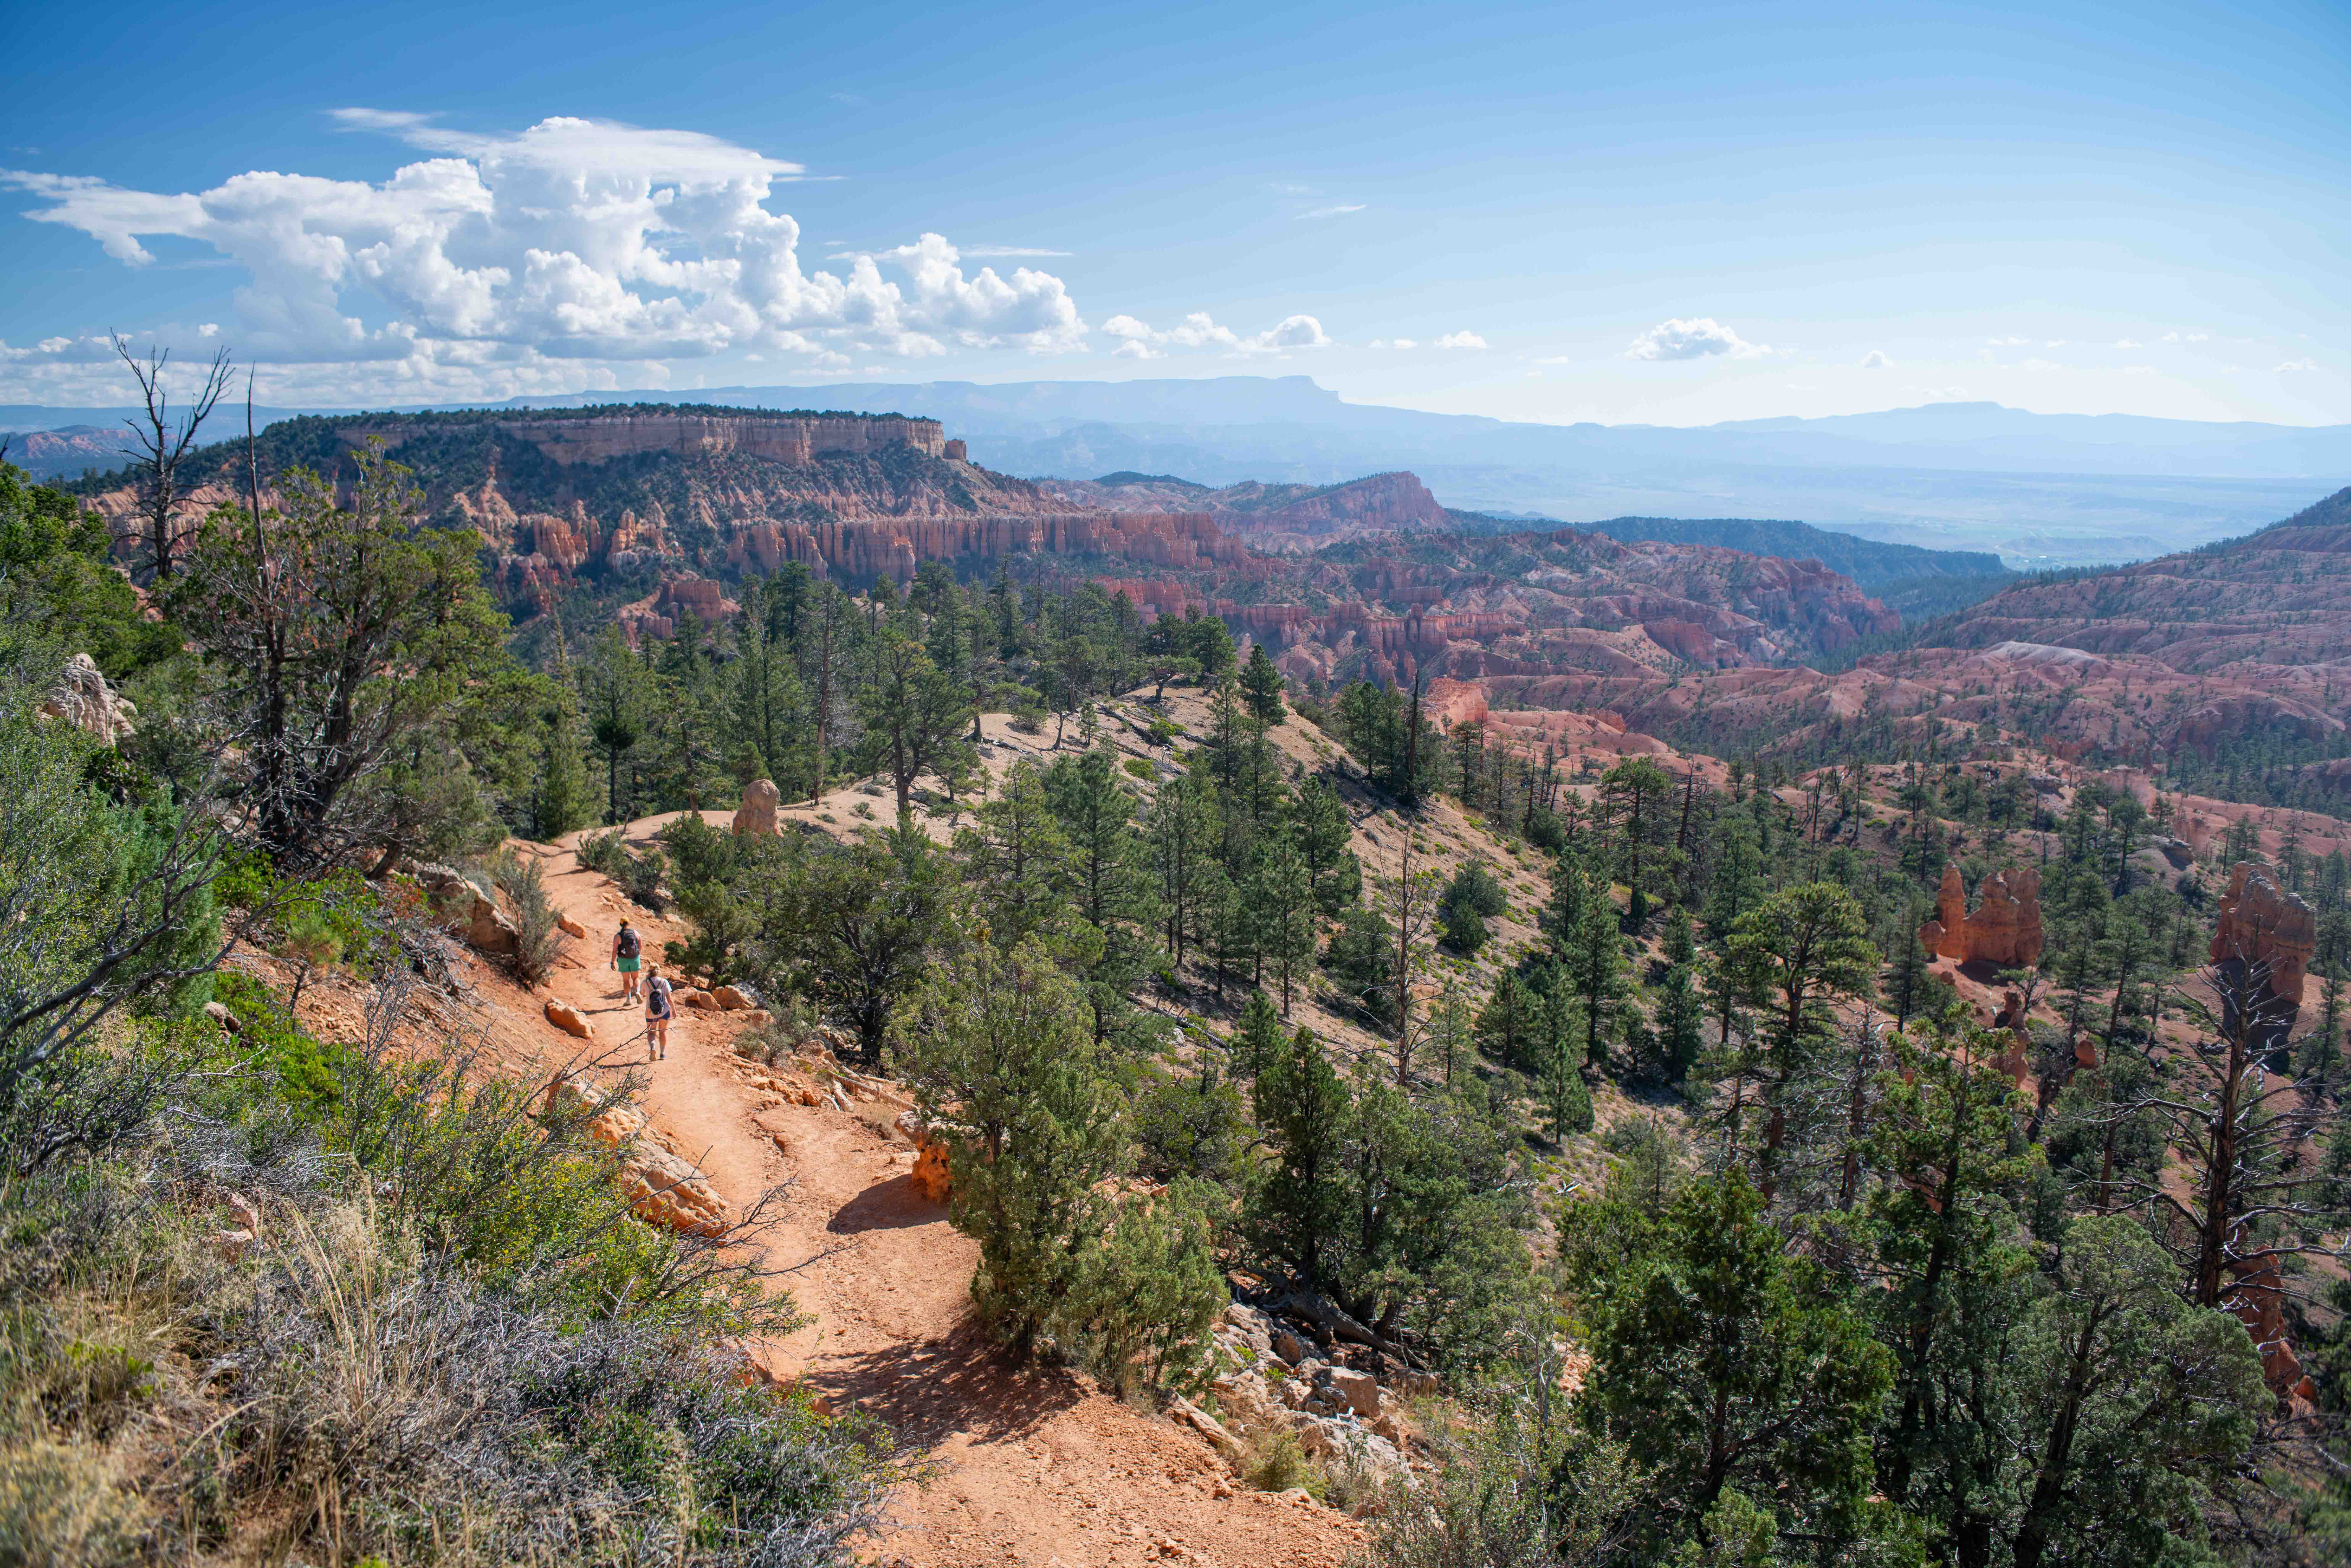 A vast landscape of red rock spires cliffs and trees with two hikers along a trail